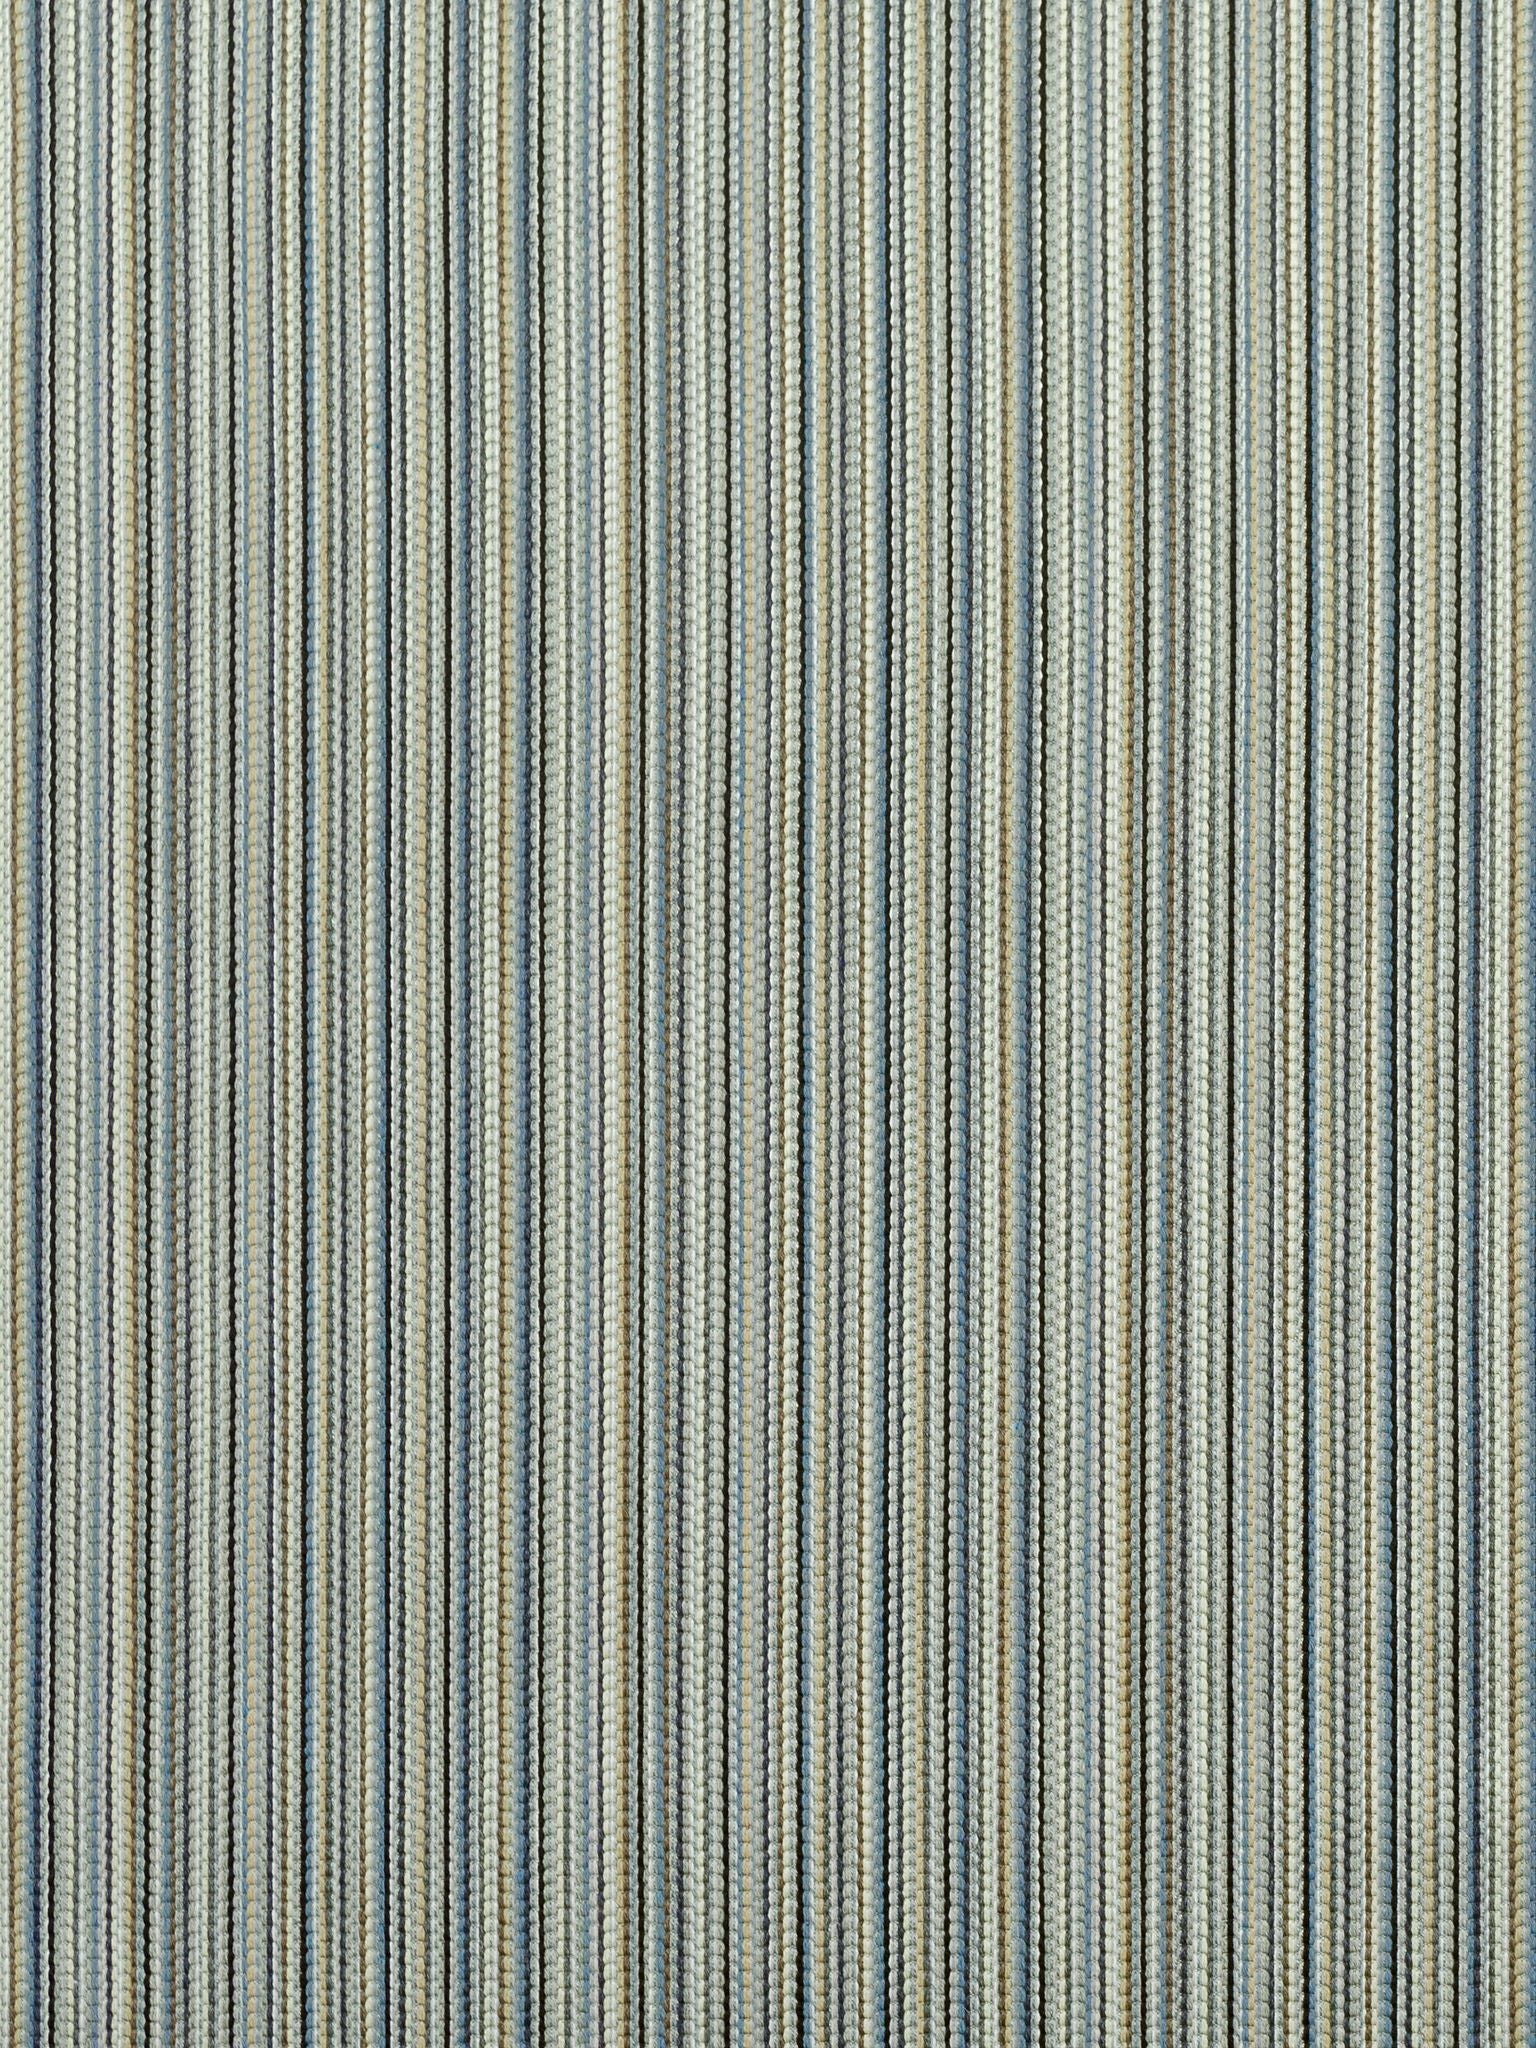 Alder Stripe fabric in moonstone color - pattern number GW 000127231 - by Scalamandre in the Grey Watkins collection